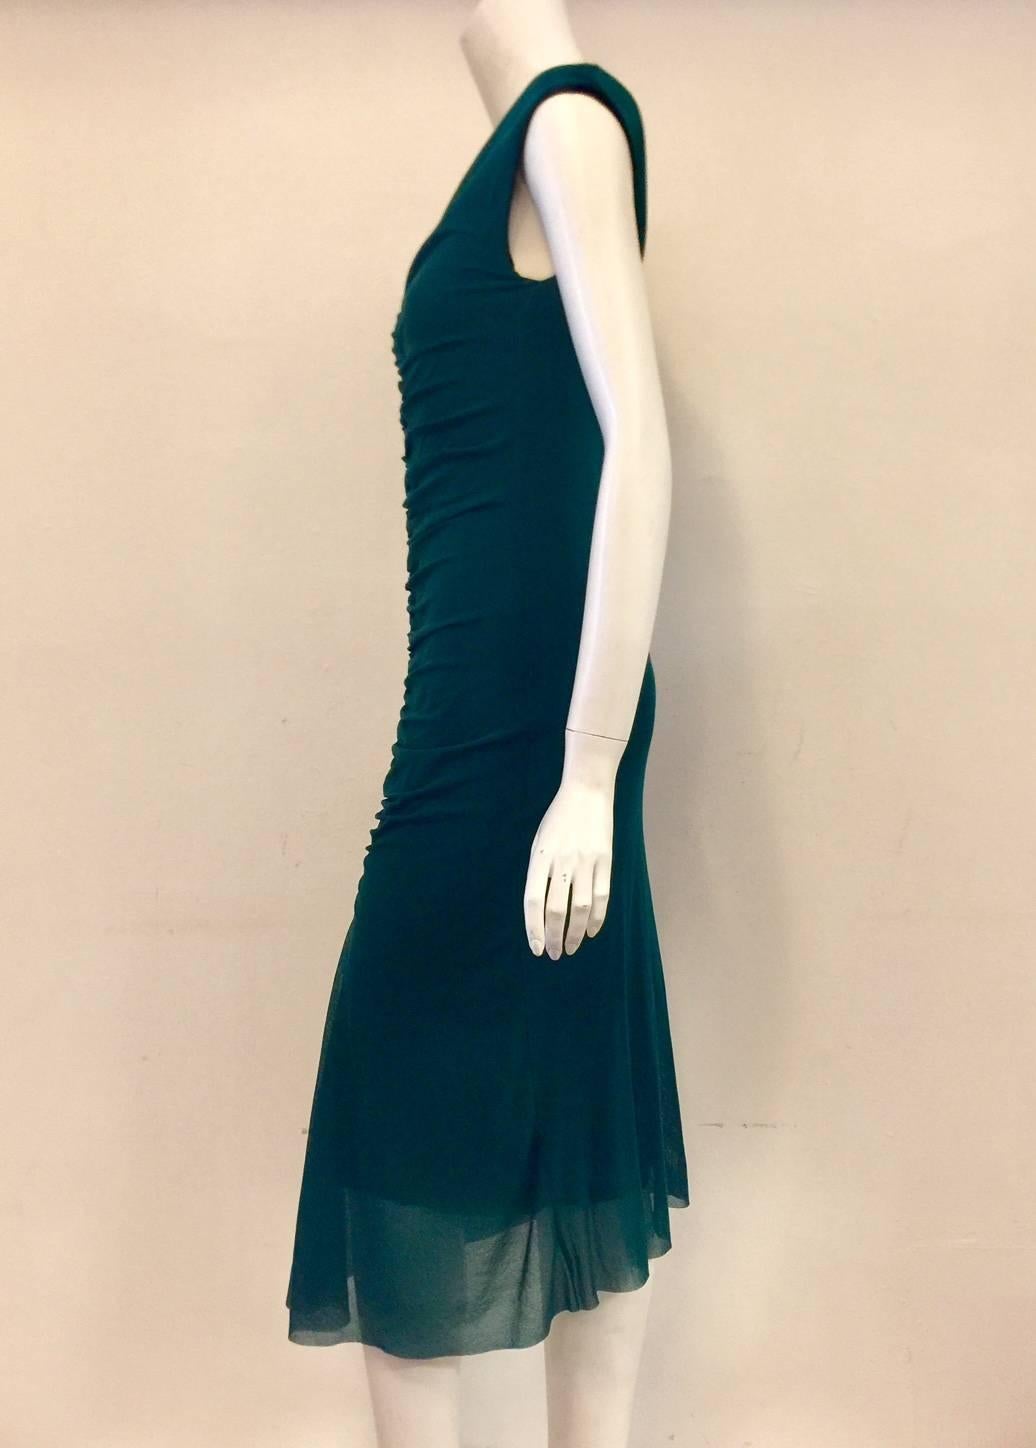 Fuzzi Forest Green Sleeveless Cocktail Dress features V-Neckline and sophisticated longer length.  Ruched front and slightly shorter, tiered lining are the finishing touches!  Will quickly become a favored traveling companion.  Made in Italy. 